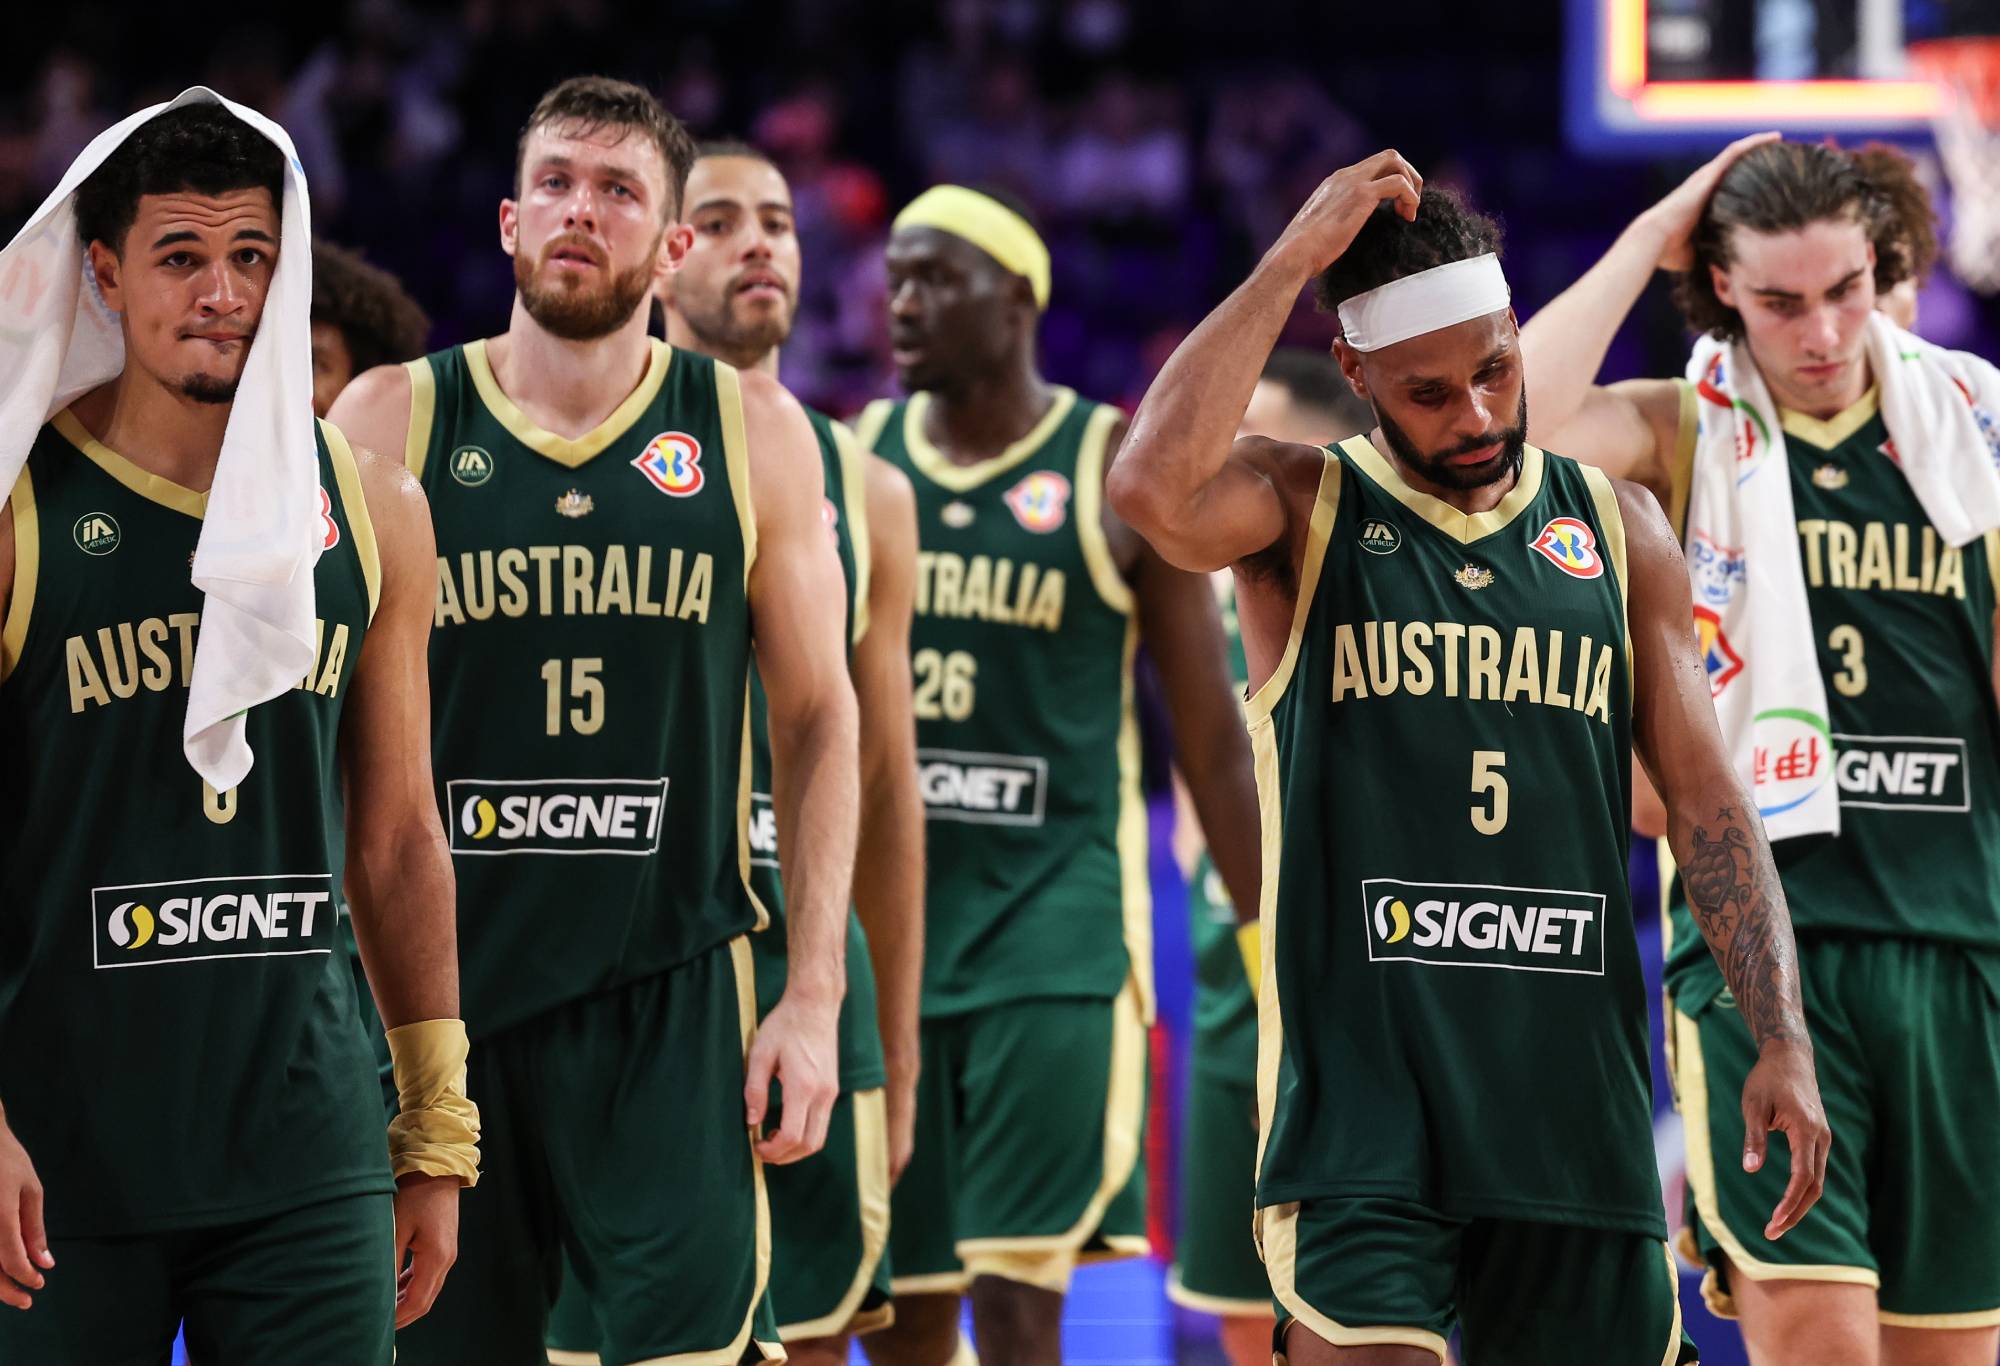 OKINAWA, JAPAN - SEPTEMBER 01: Australian players look dejected after the FIBA Basketball World Cup 2nd Round Group K game between Slovenia and Australia at Okinawa Arena on September 01, 2023 in Okinawa, Japan. (Photo by Takashi Aoyama/Getty Images)